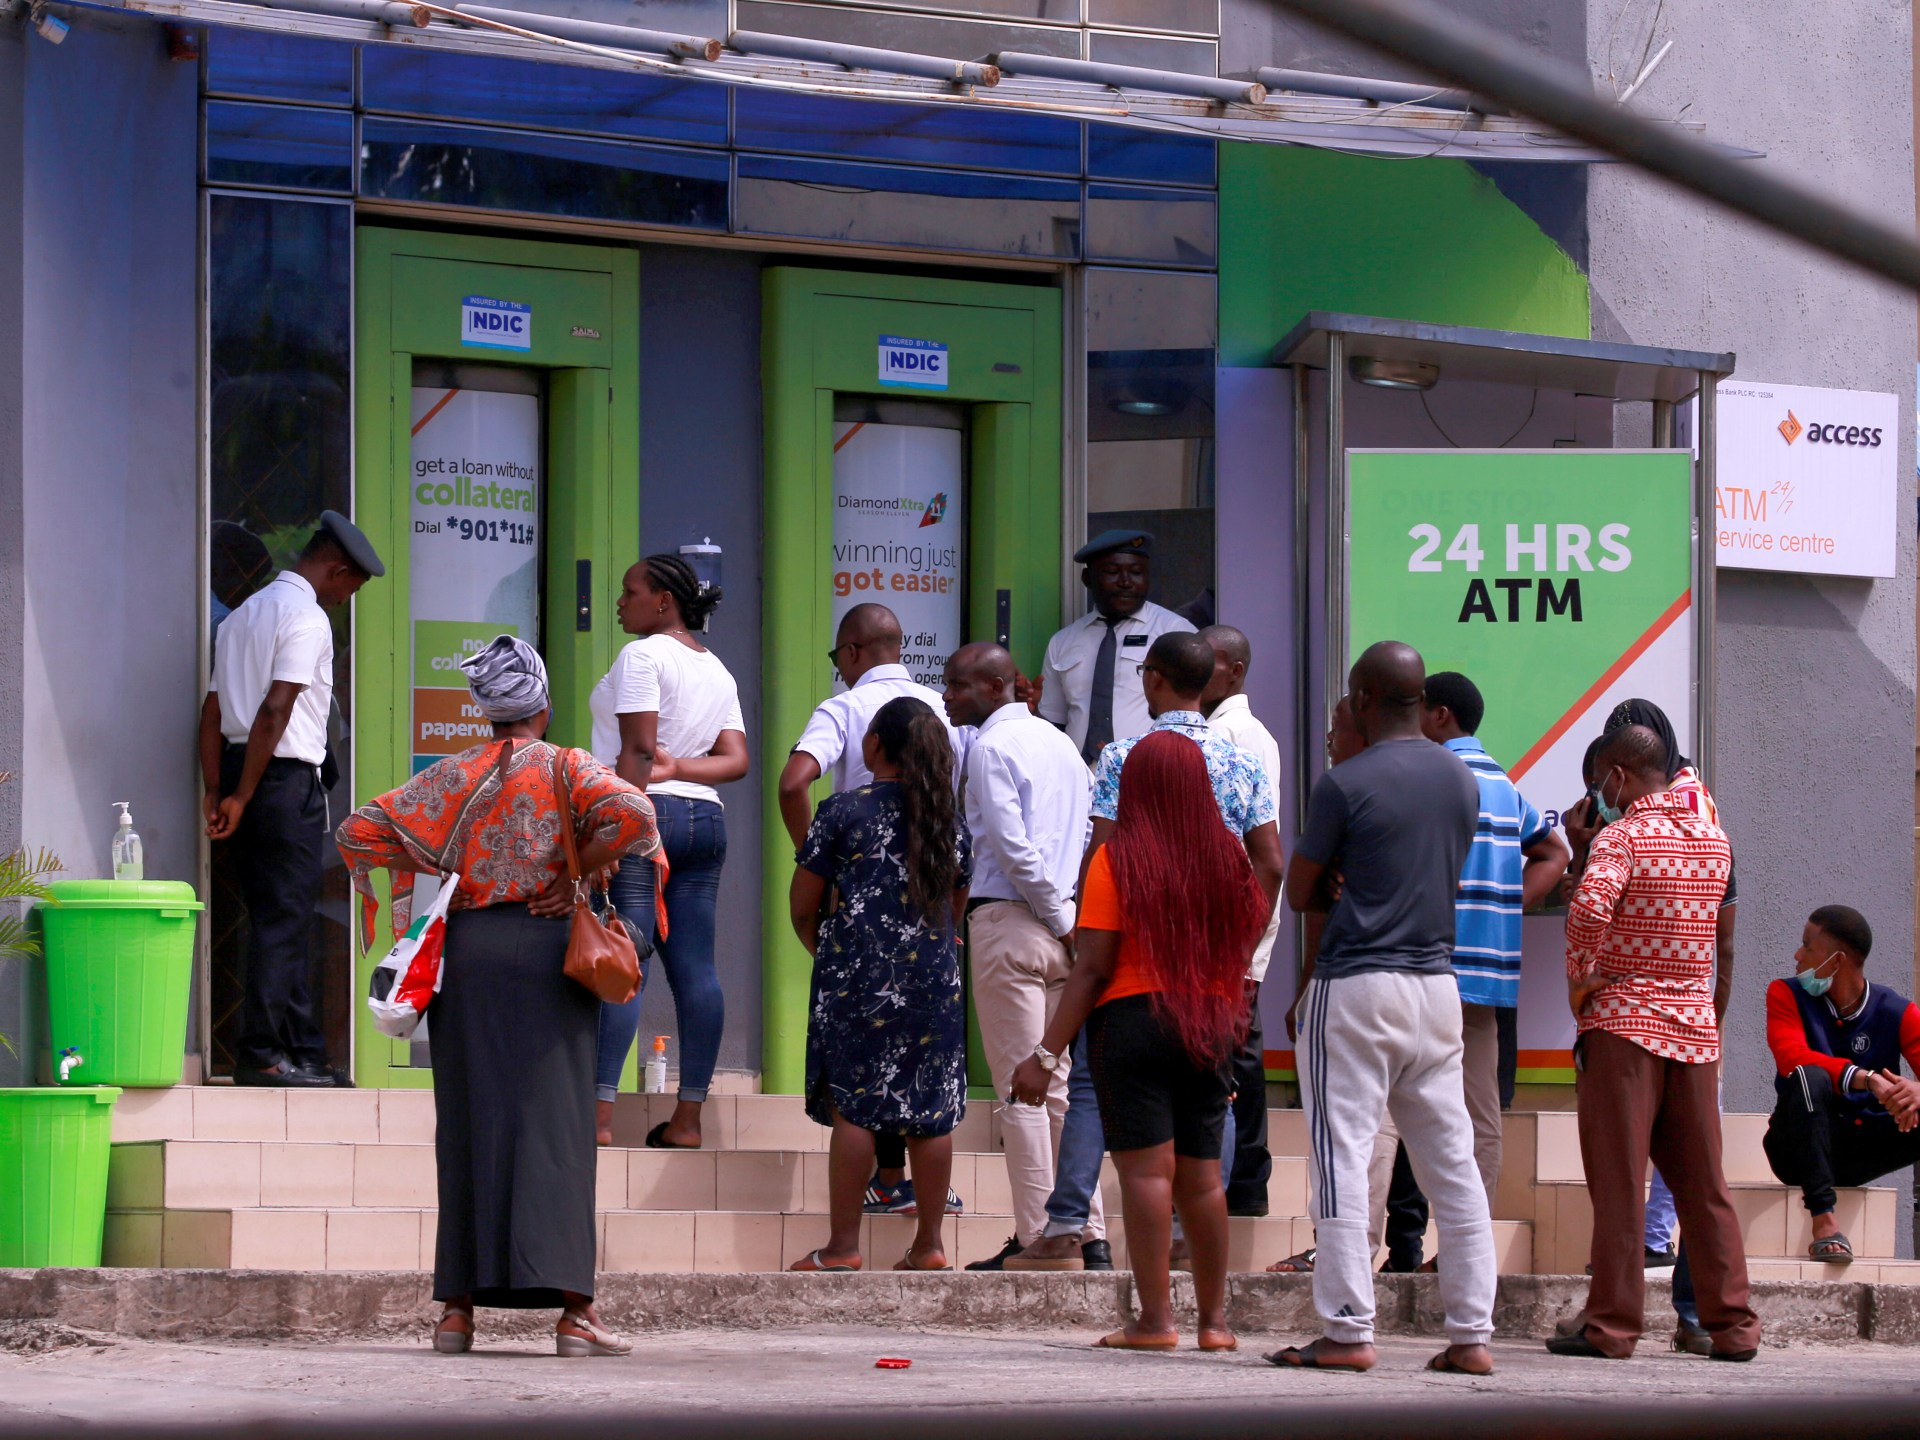 Nigeria to limit cash withdrawals to $225 a week